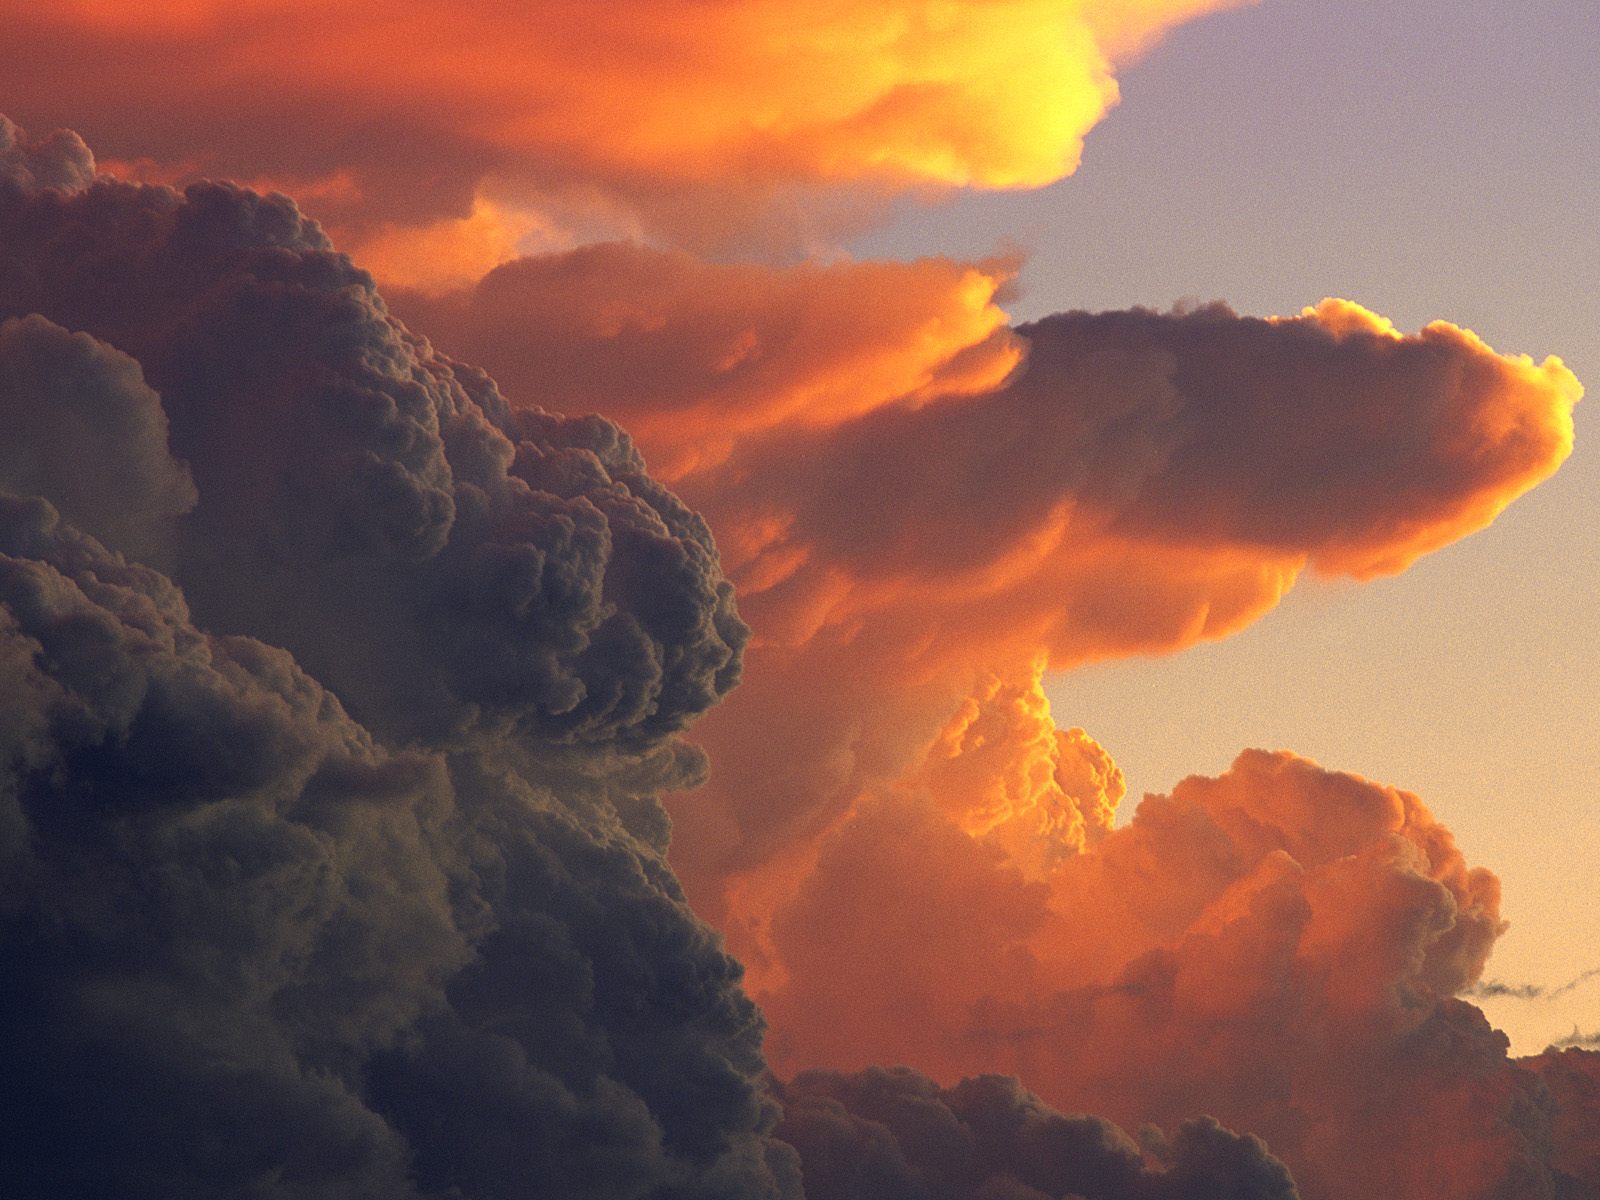 Sunset Clouds Wallpapers